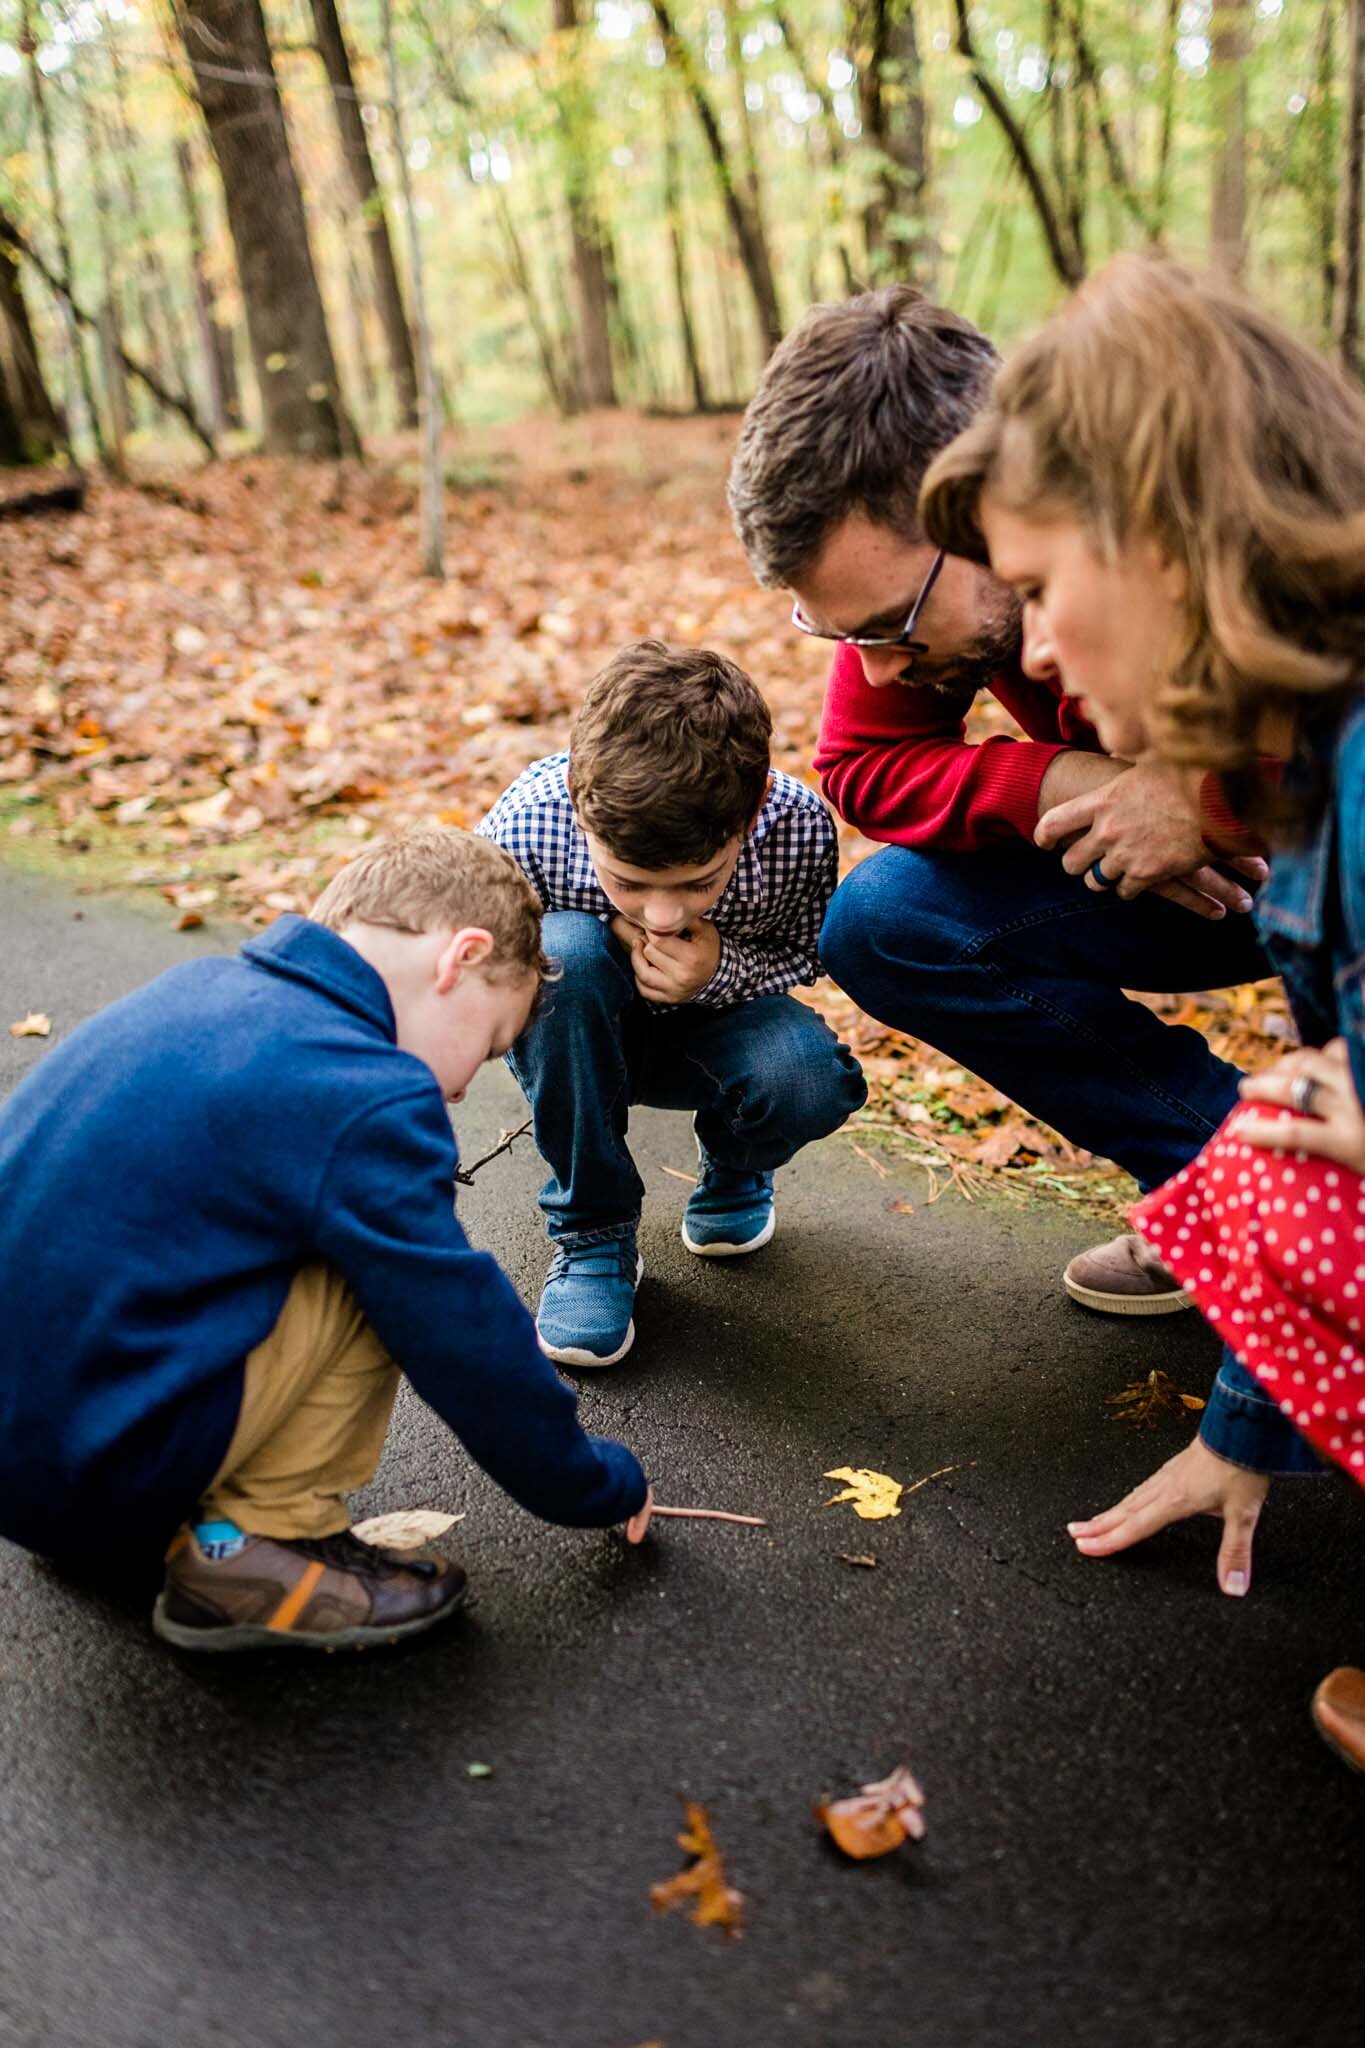 Raleigh Family Photographer | By G. Lin Photography | Umstead Park | Family looking at earthworm